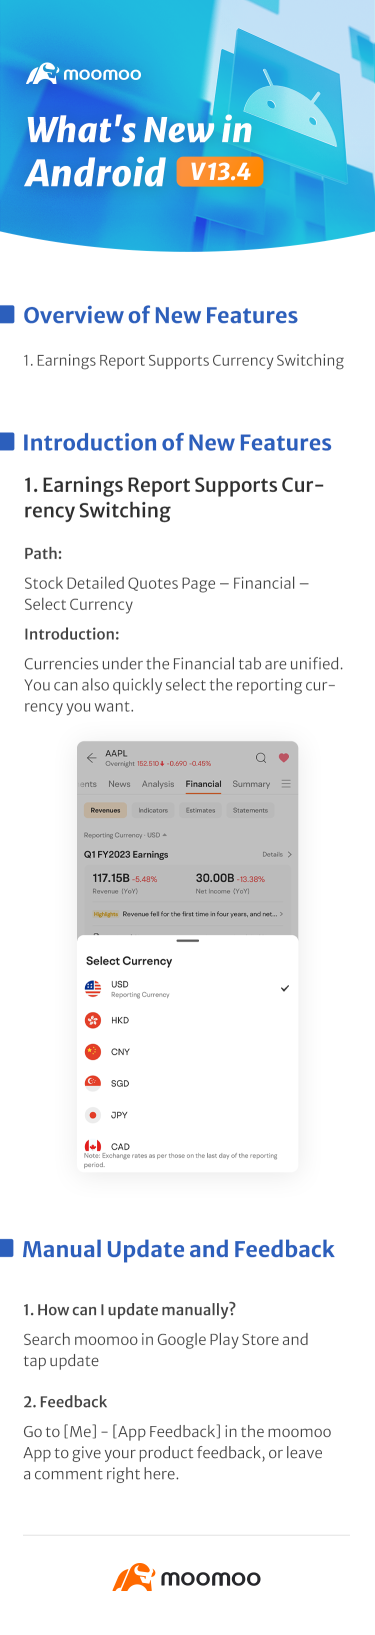 What's New: Currency switching for earnings report available in Android v13.4